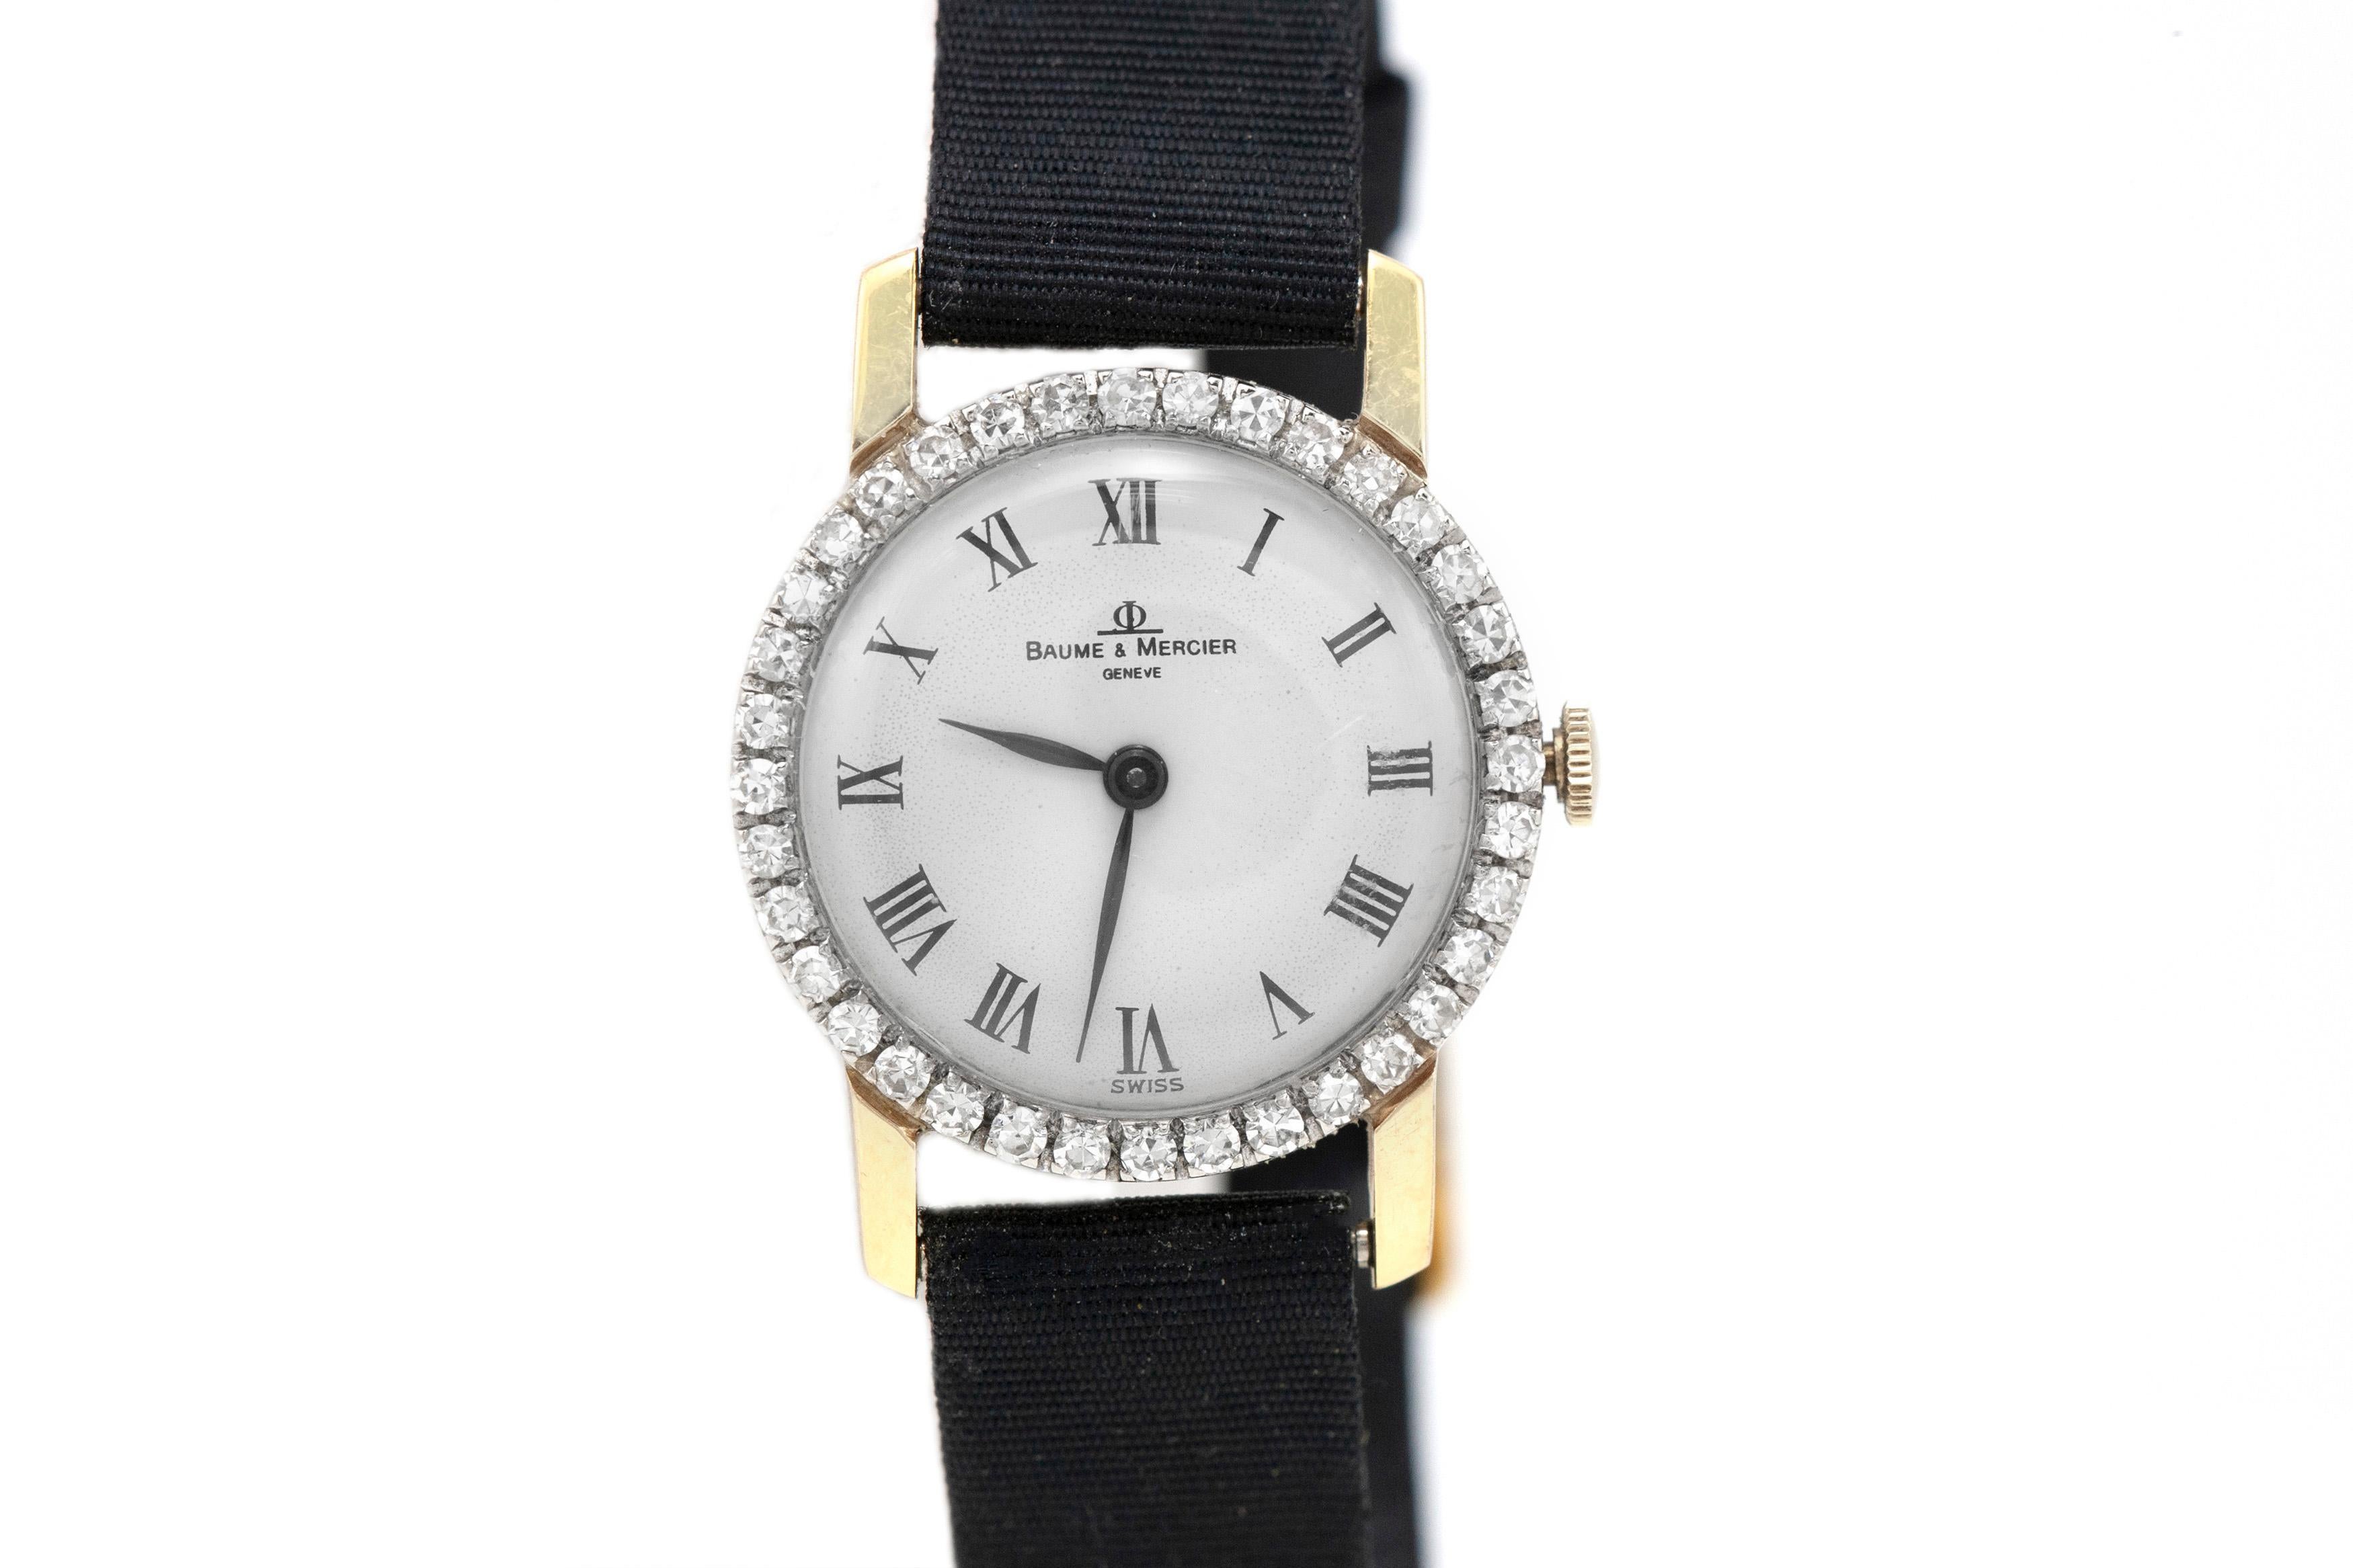 Finely crafted in 18k yellow gold with Round Brilliant cut Diamonds on the bezel weighing approximately a total of 1.20 carats, featuring a fabric band.
The face measures 24mm.
Circa 1950s